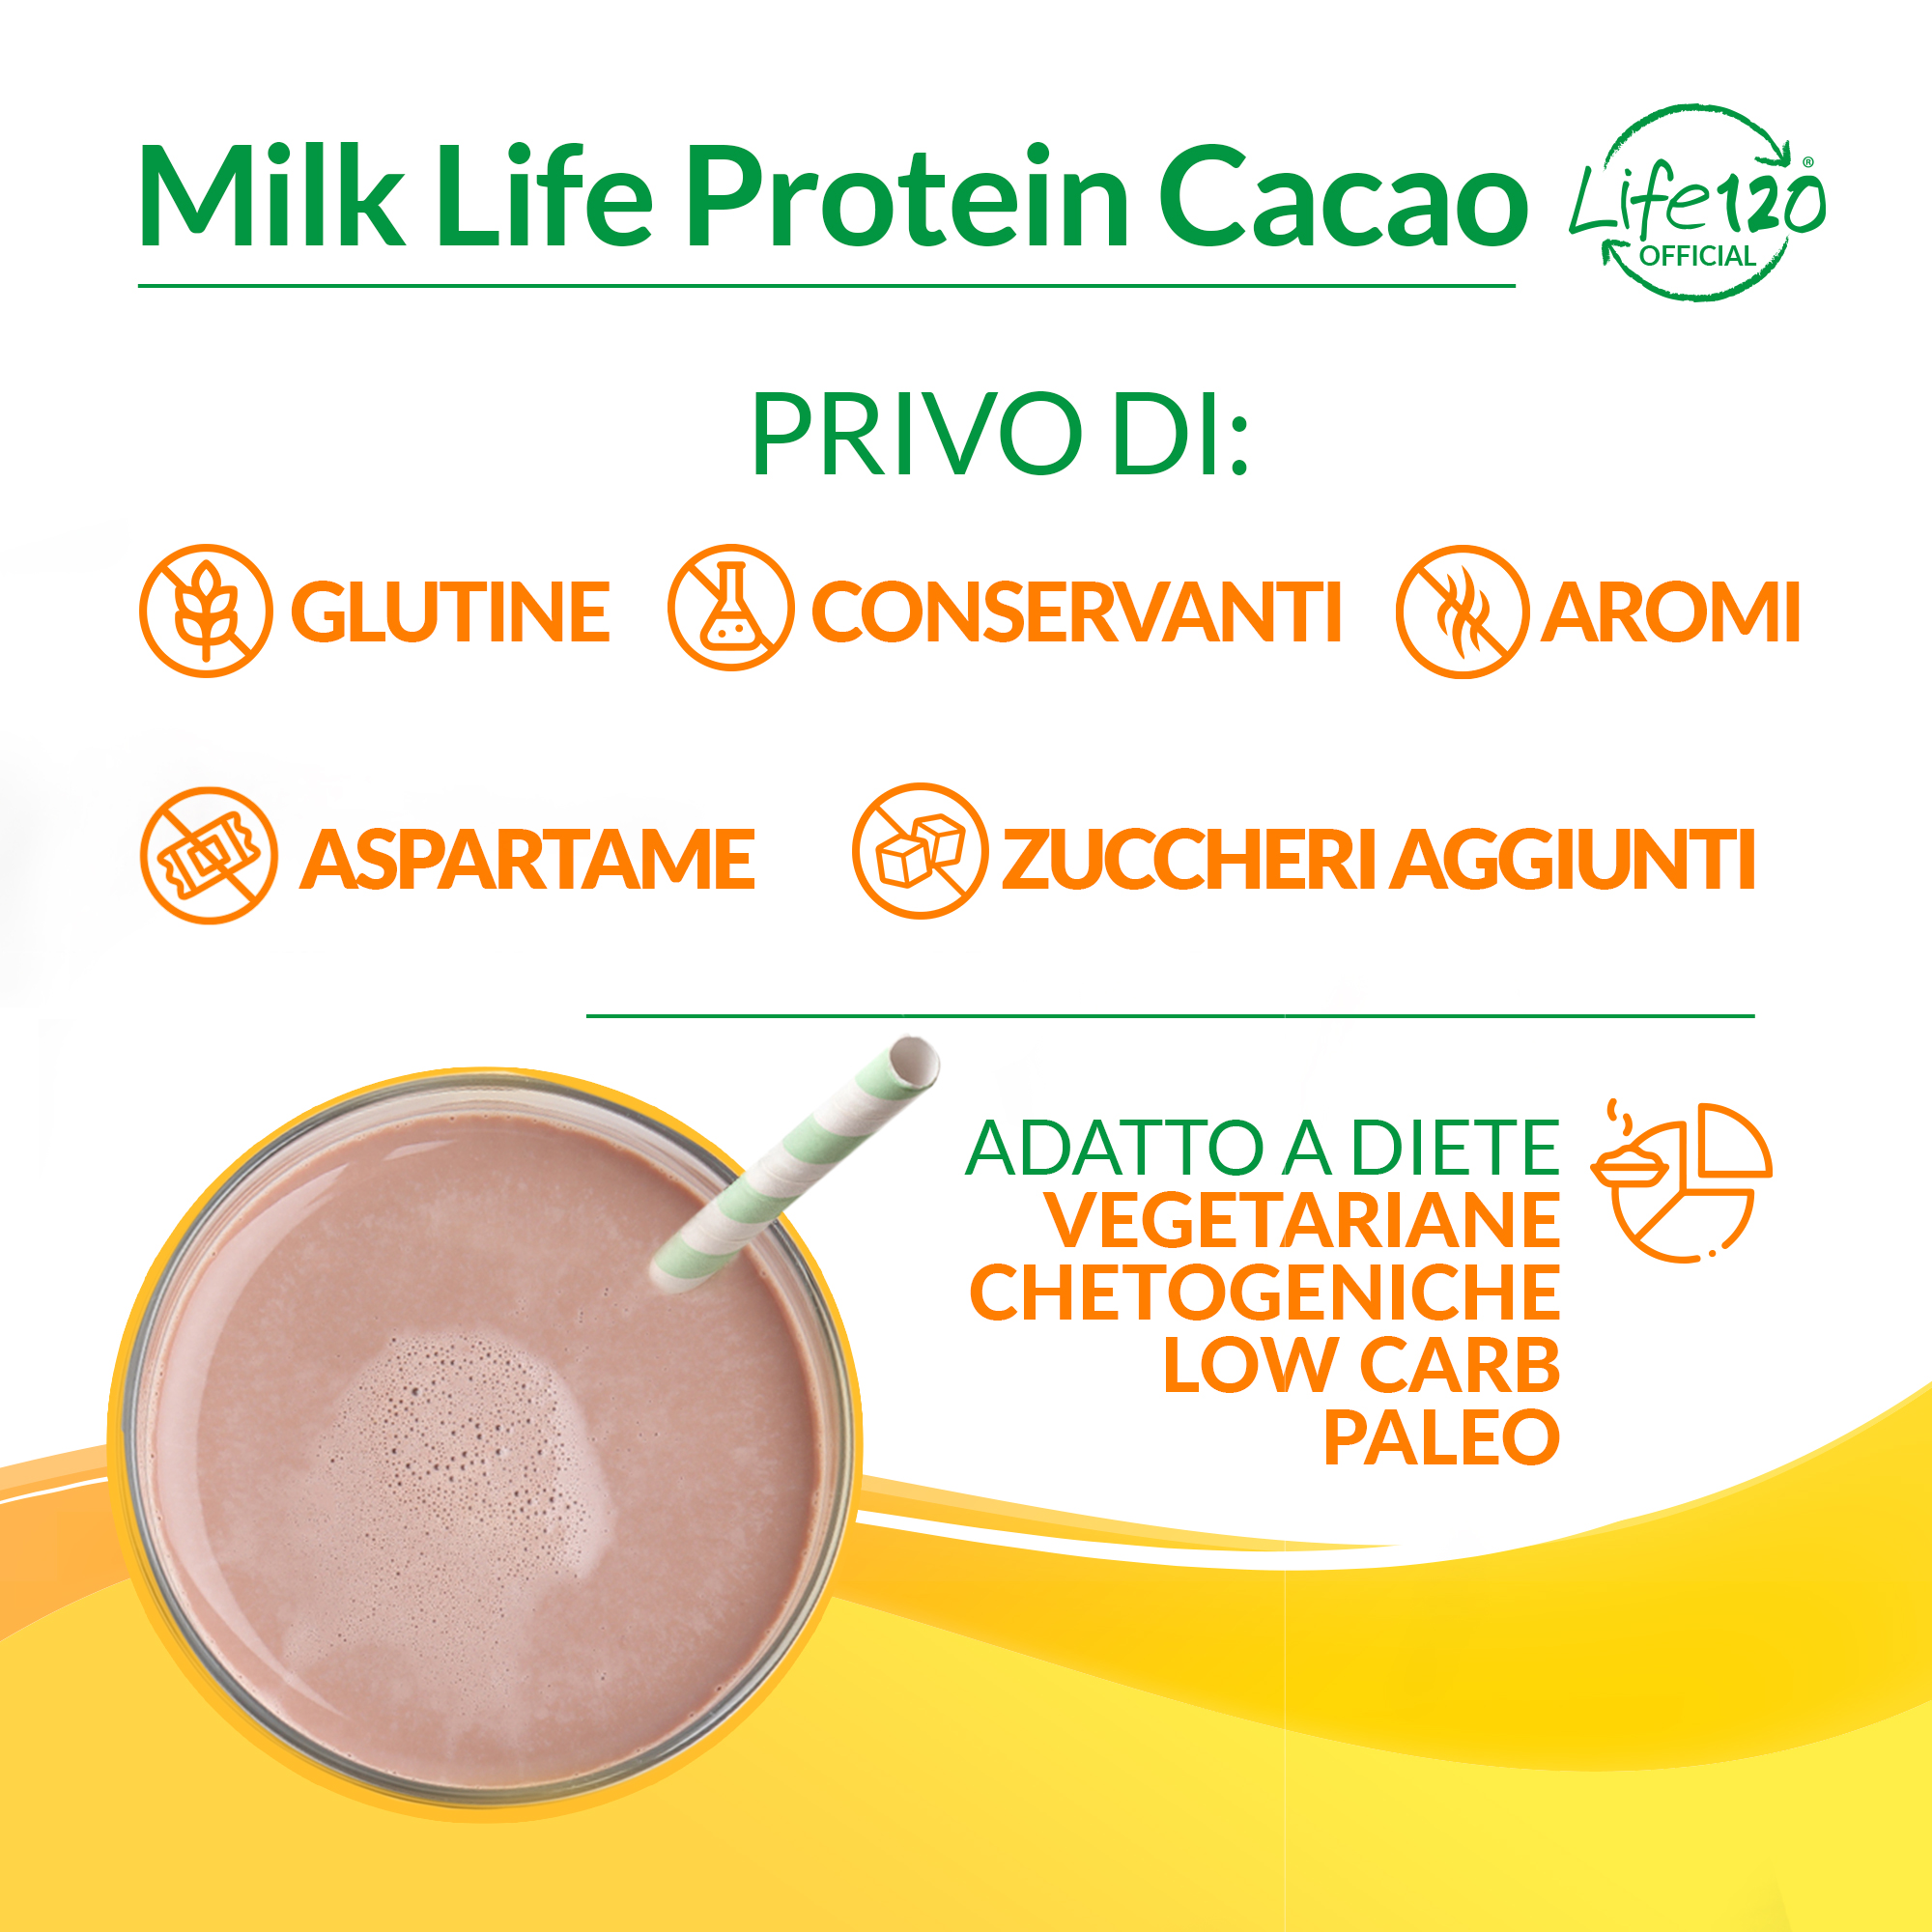 Milk Life Protein Cacao